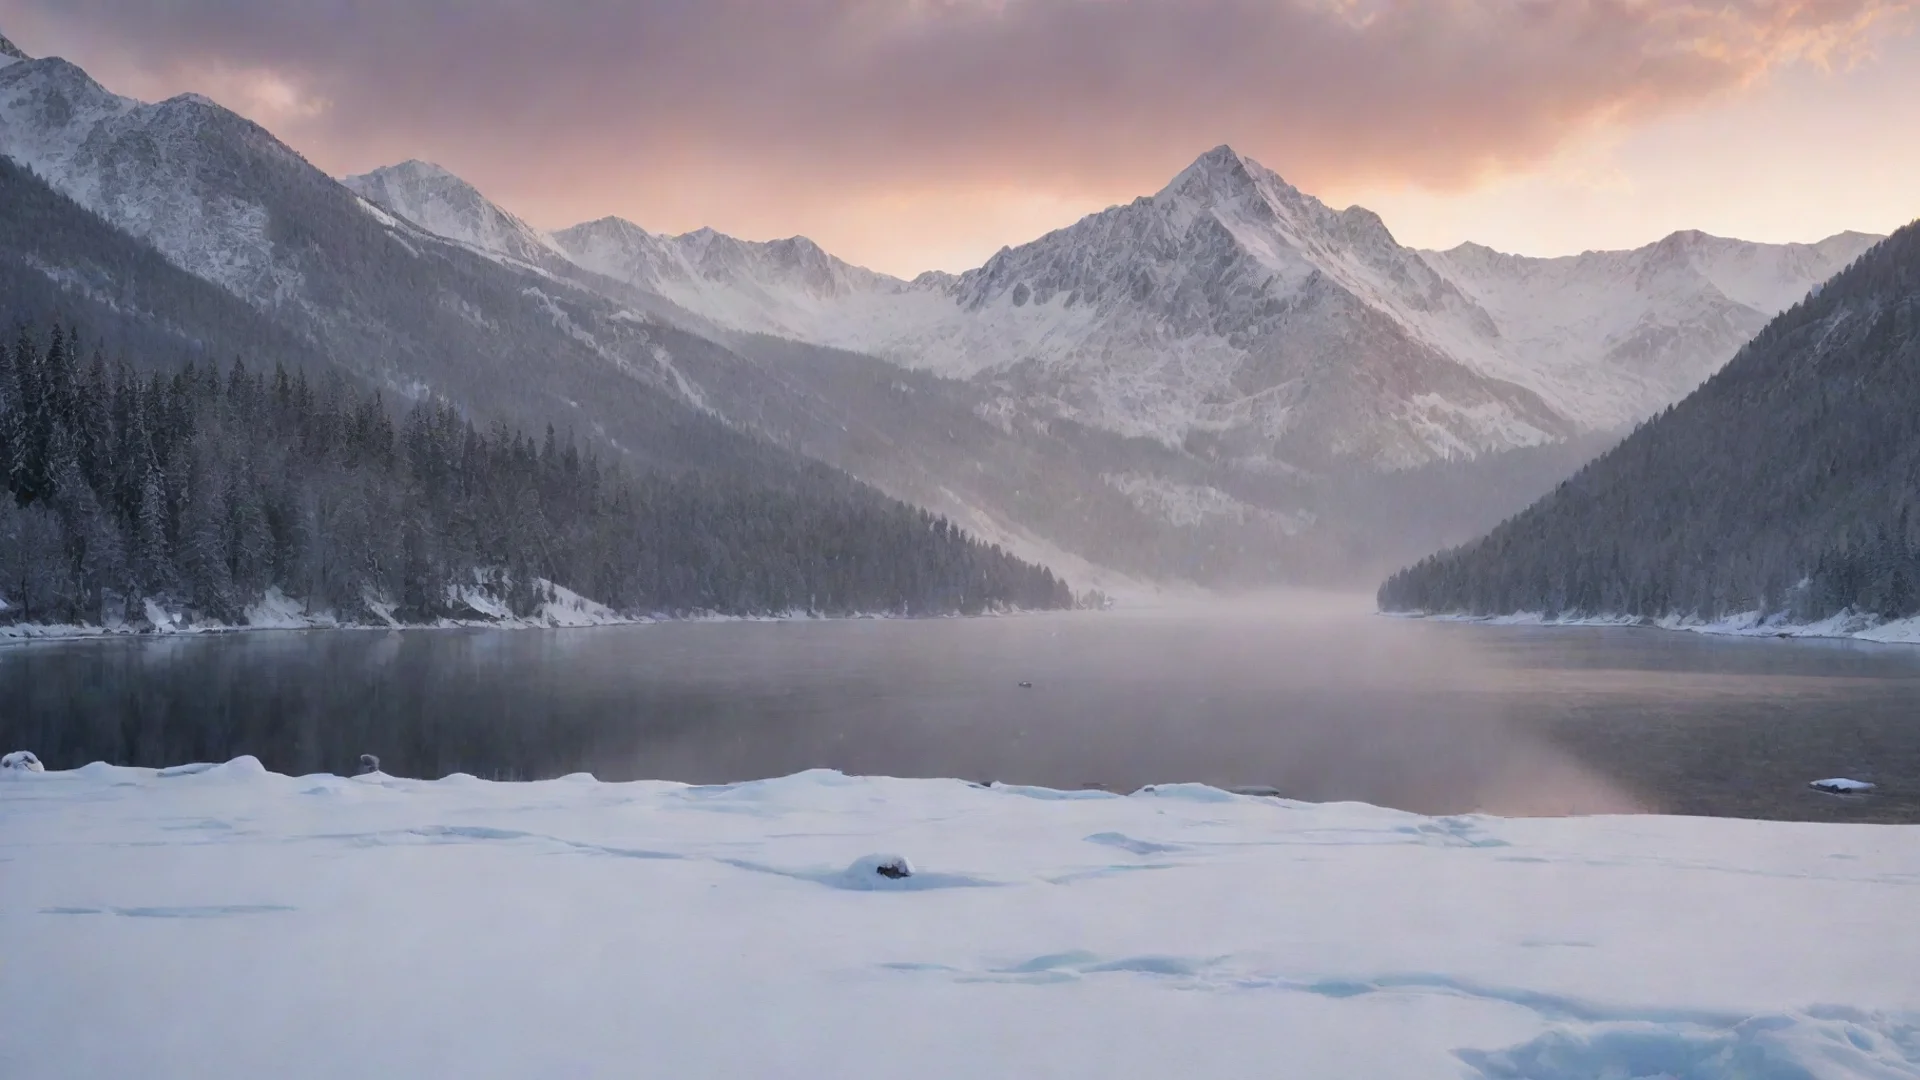 aiamazing frozen lake with snow falling down in a mountainous background and during a sunset awesome portrait 2 wide